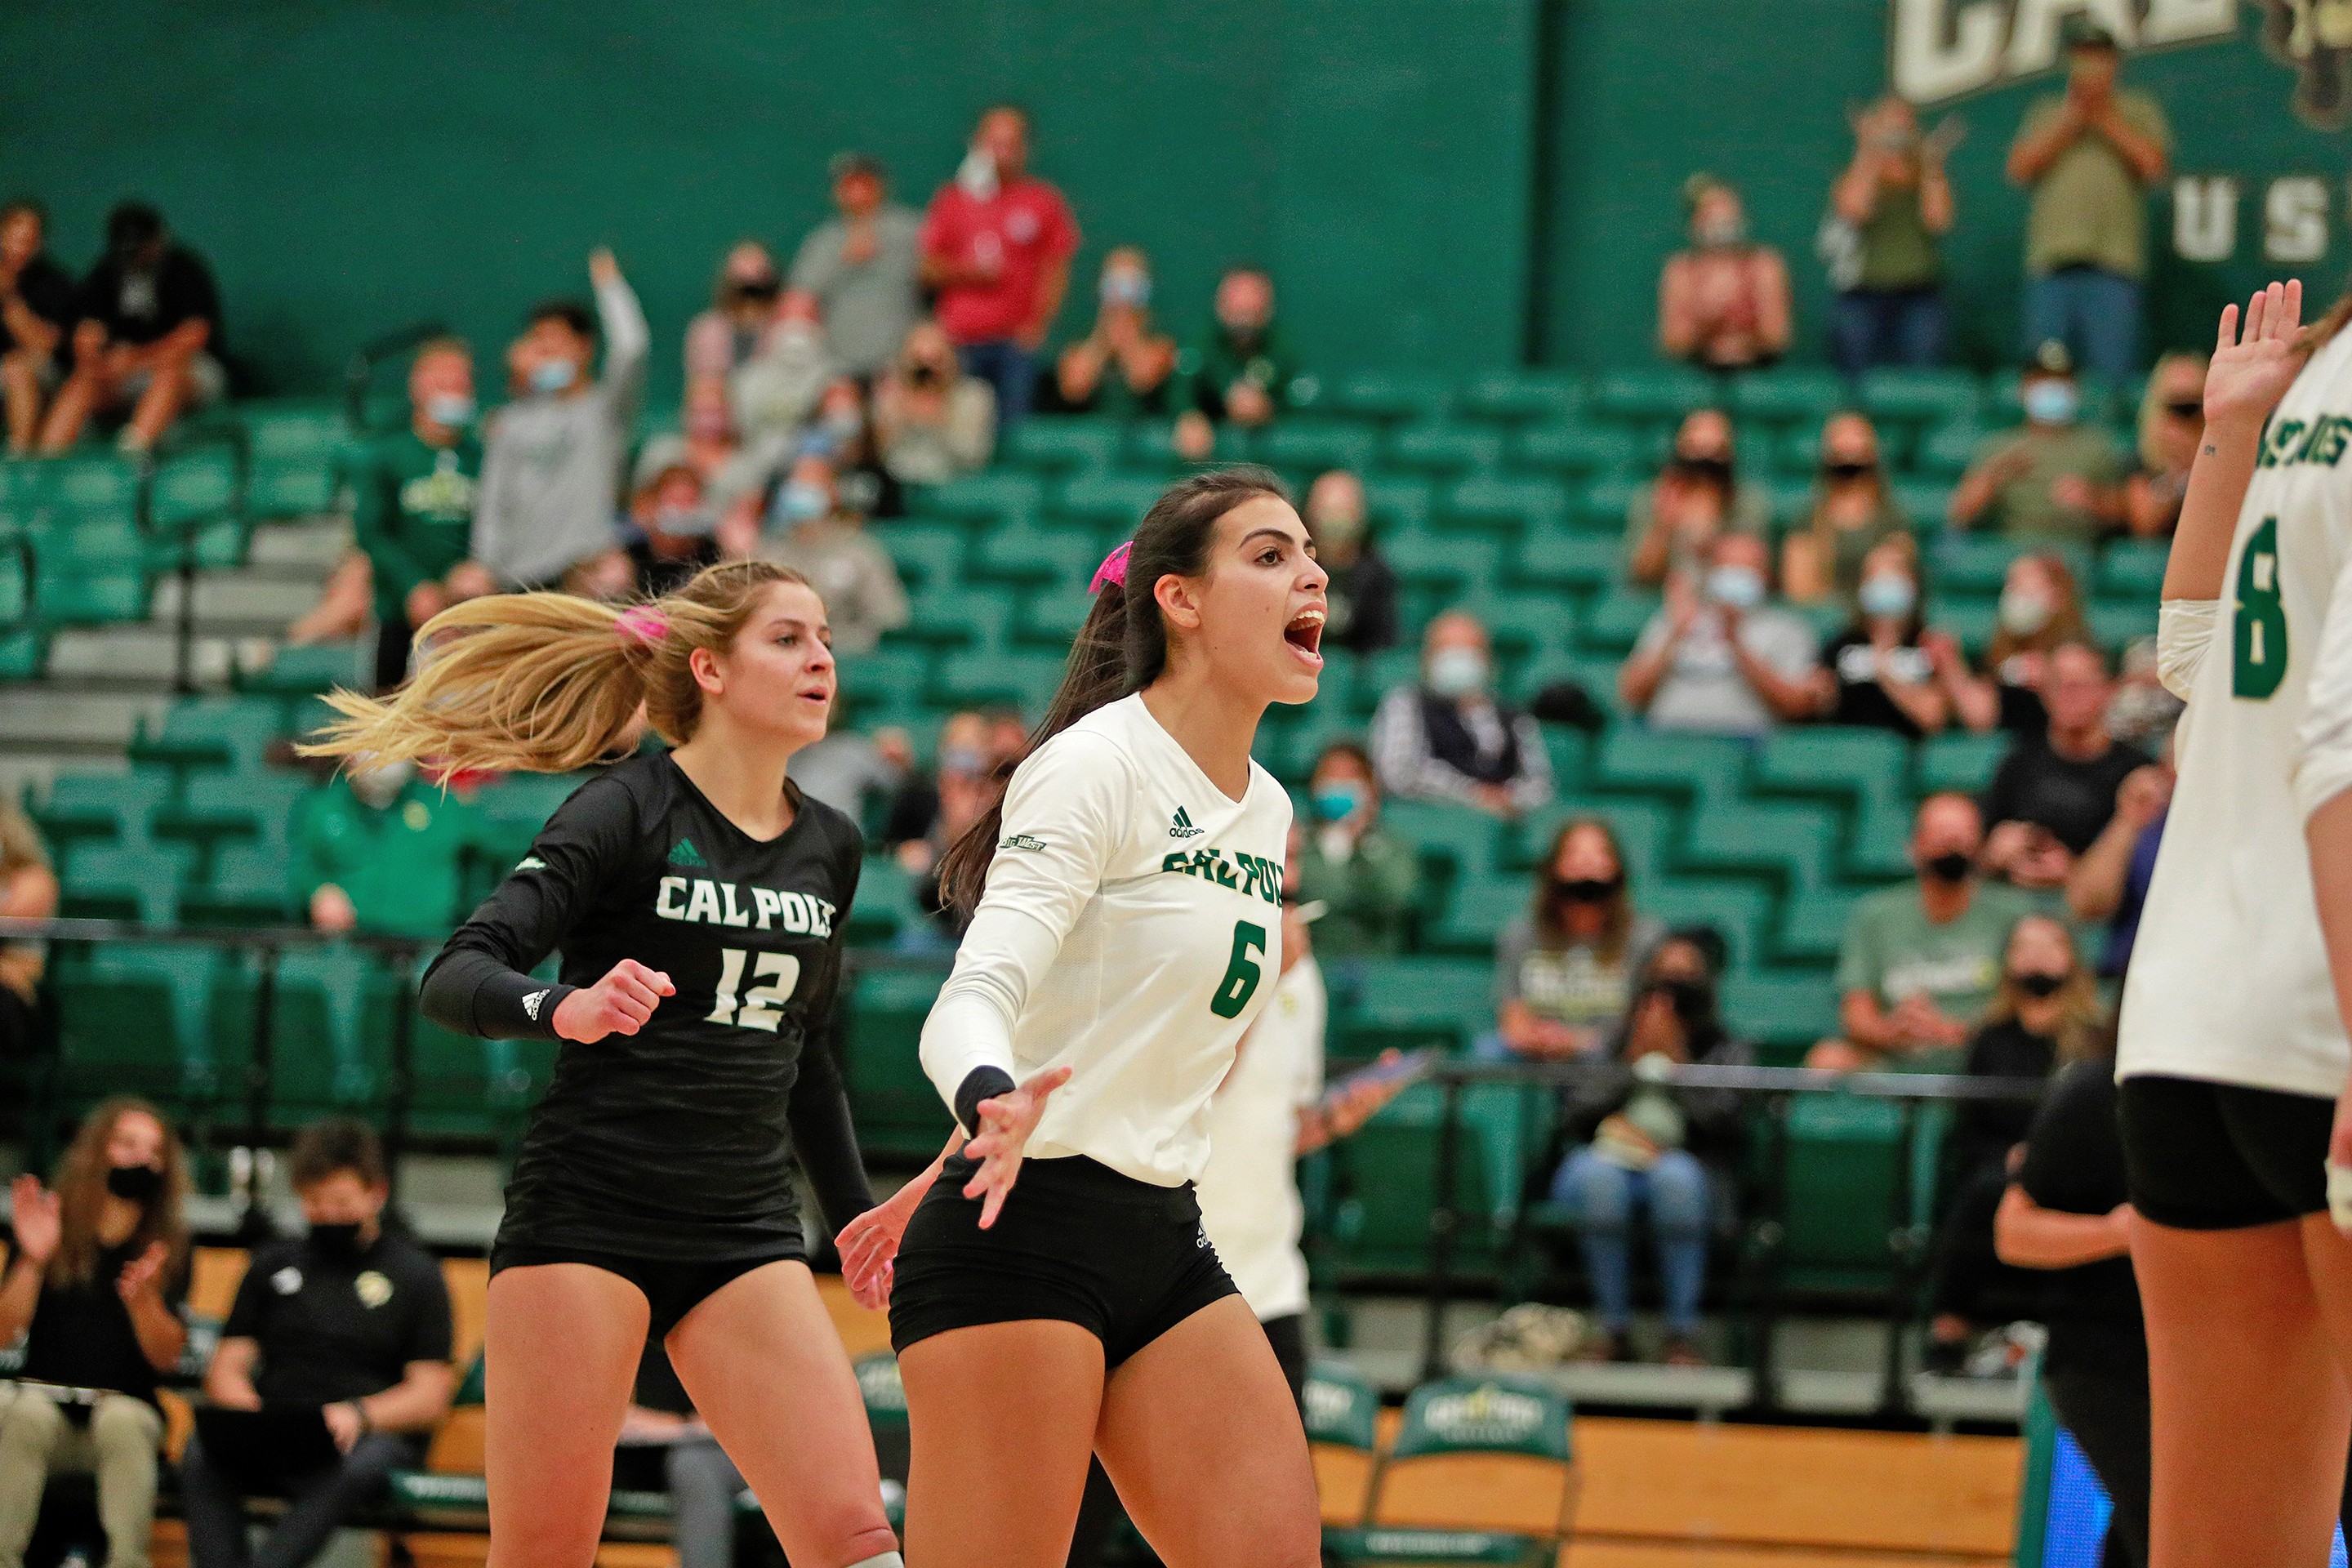 Lessons learned Cal Poly's women's volleyball team had its first home